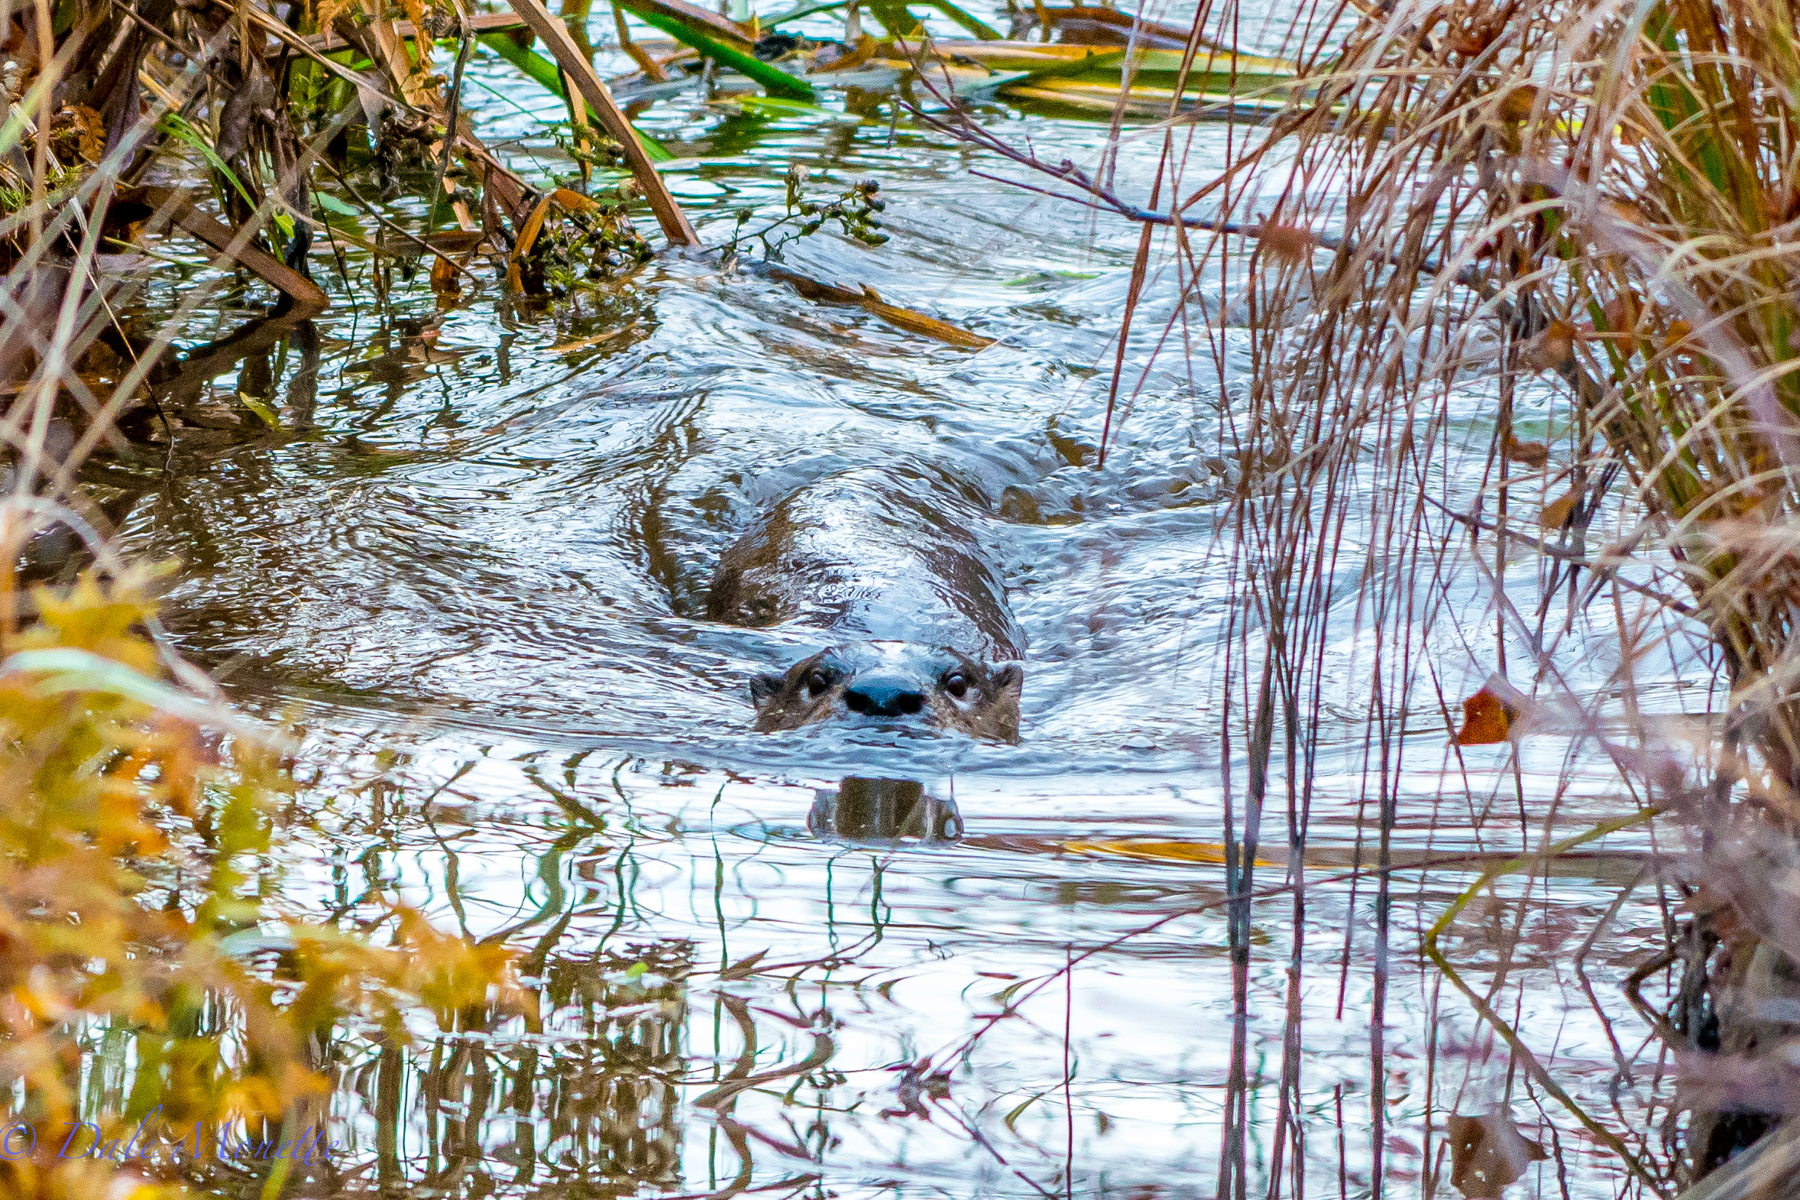   I was walking up a dirt road by a beaver pond early one morning in the fall and heard this racket coming from the outfall ditch from the pond. &nbsp;I spotted this otter going back and forth in the ditch fishing for small fish or frogs. &nbsp;  